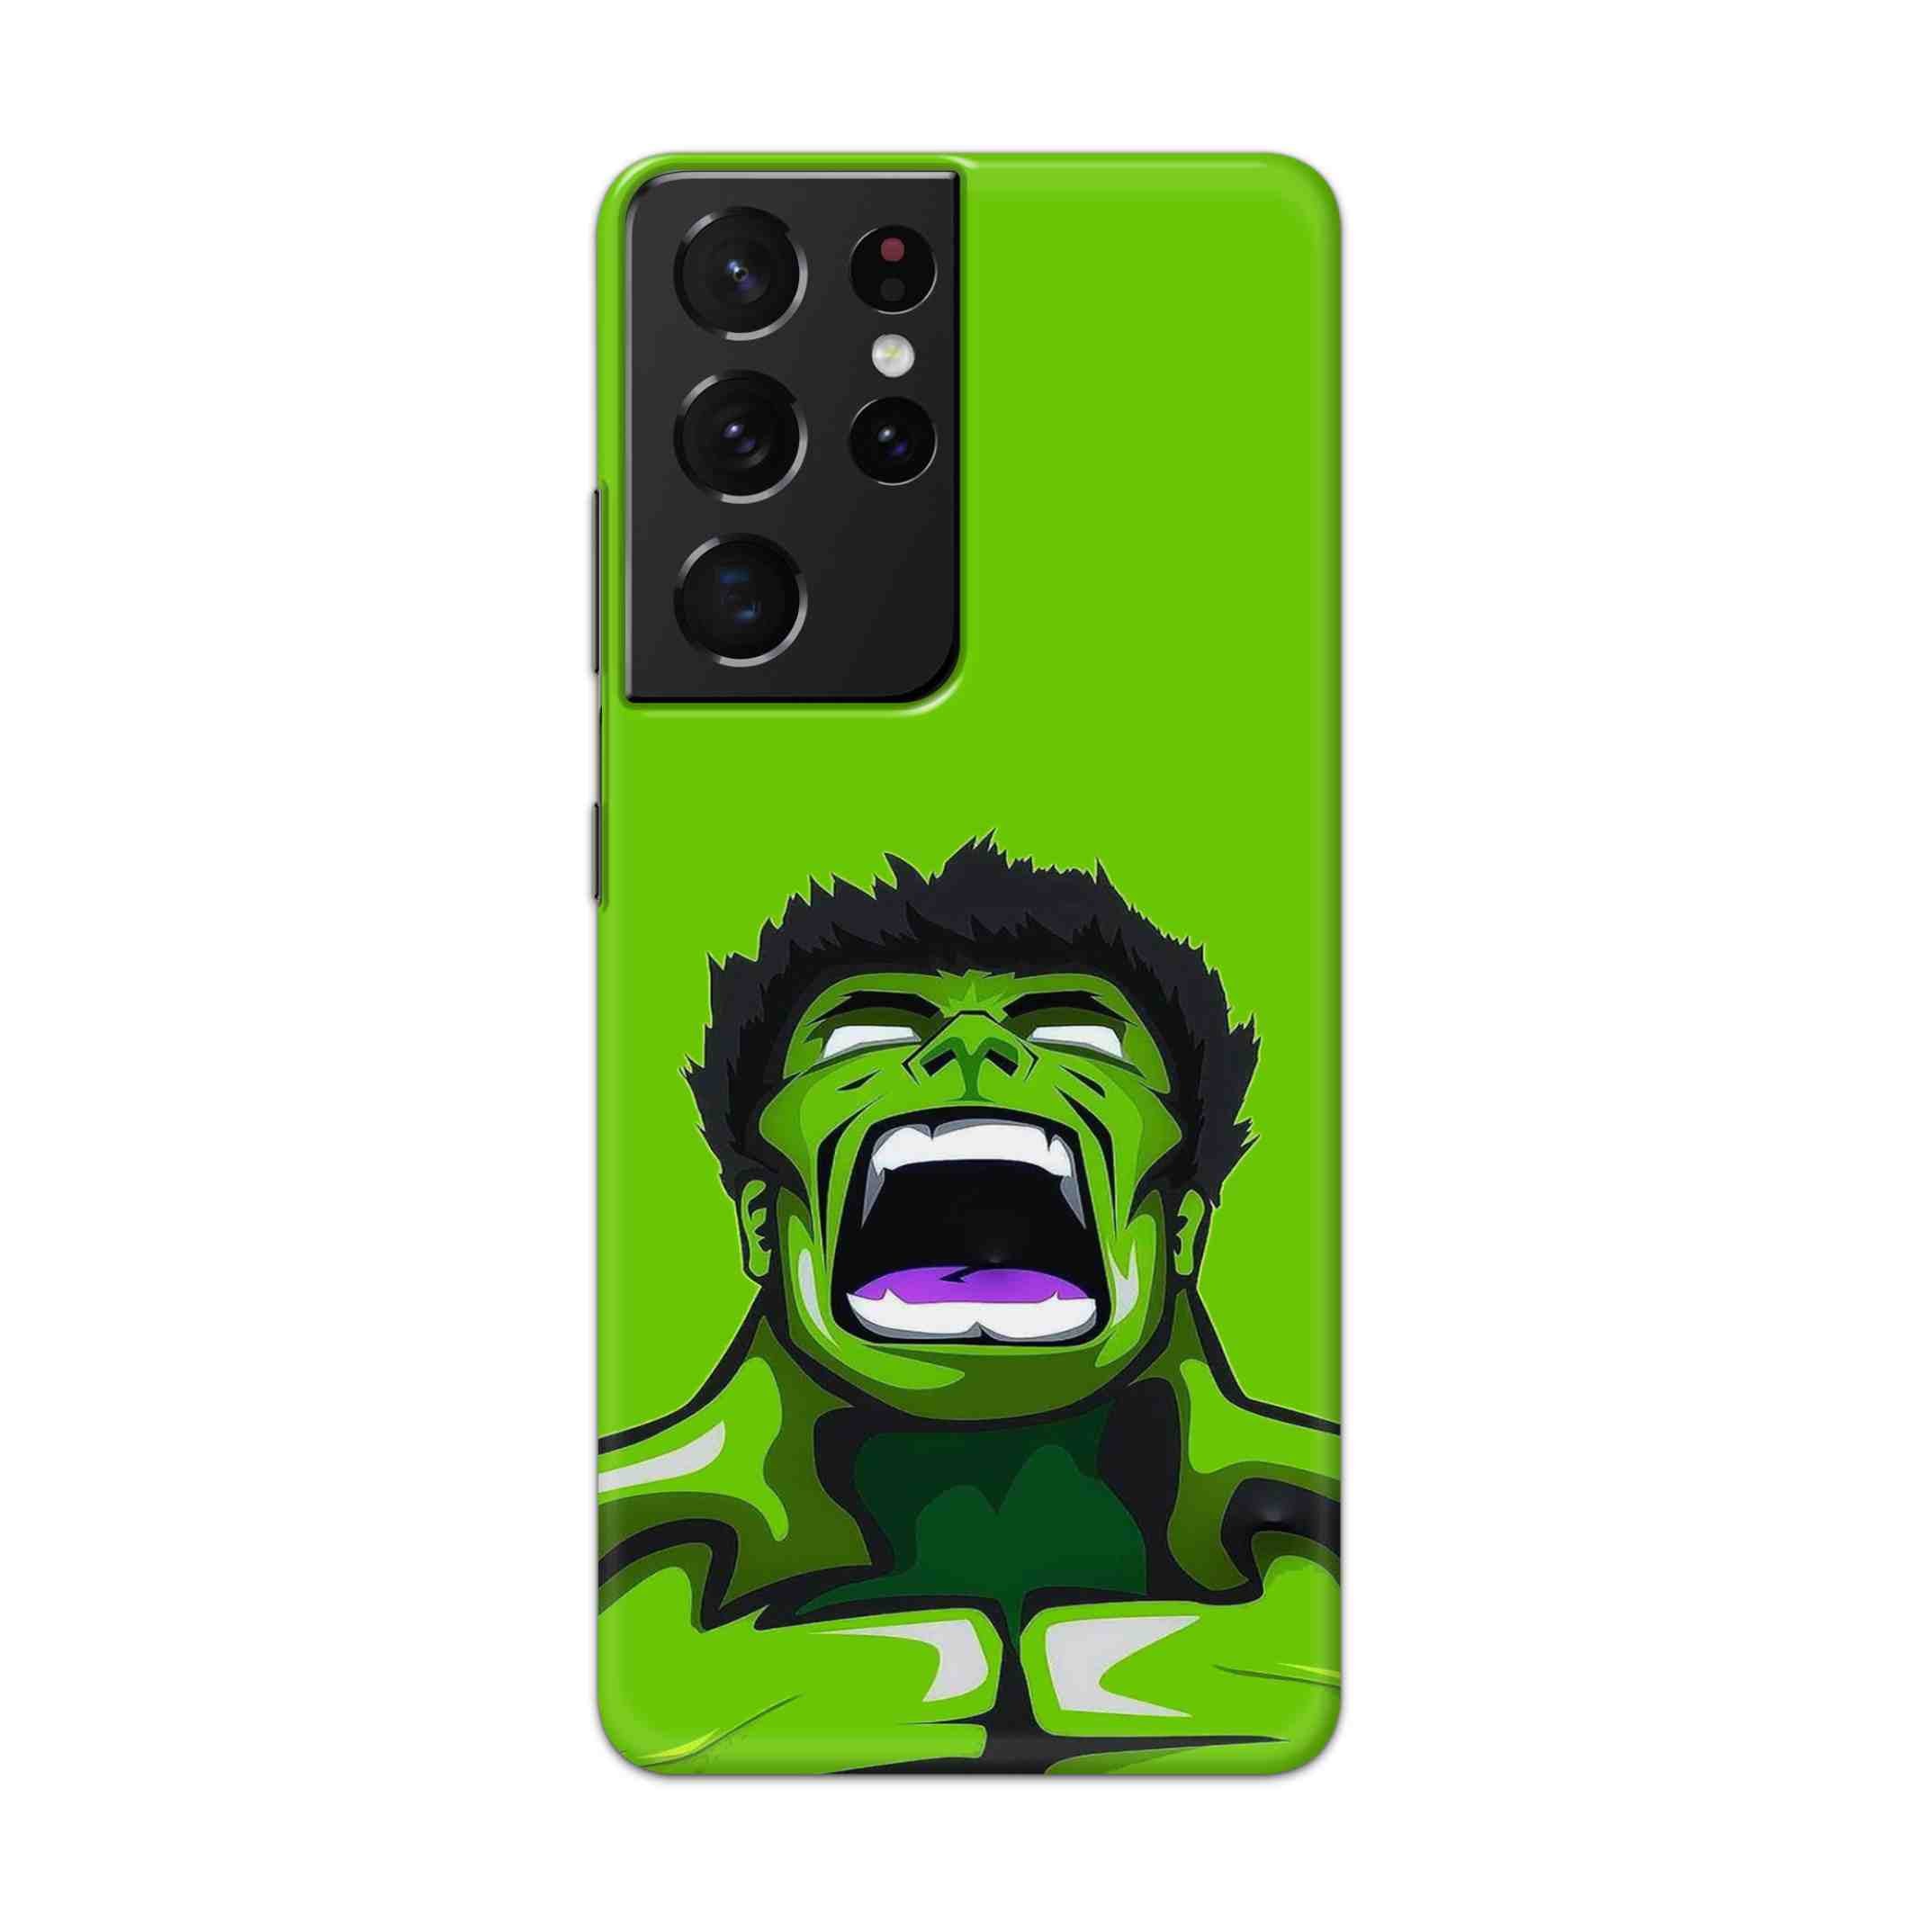 Buy Green Hulk Hard Back Mobile Phone Case Cover For Samsung Galaxy S21 Ultra Online